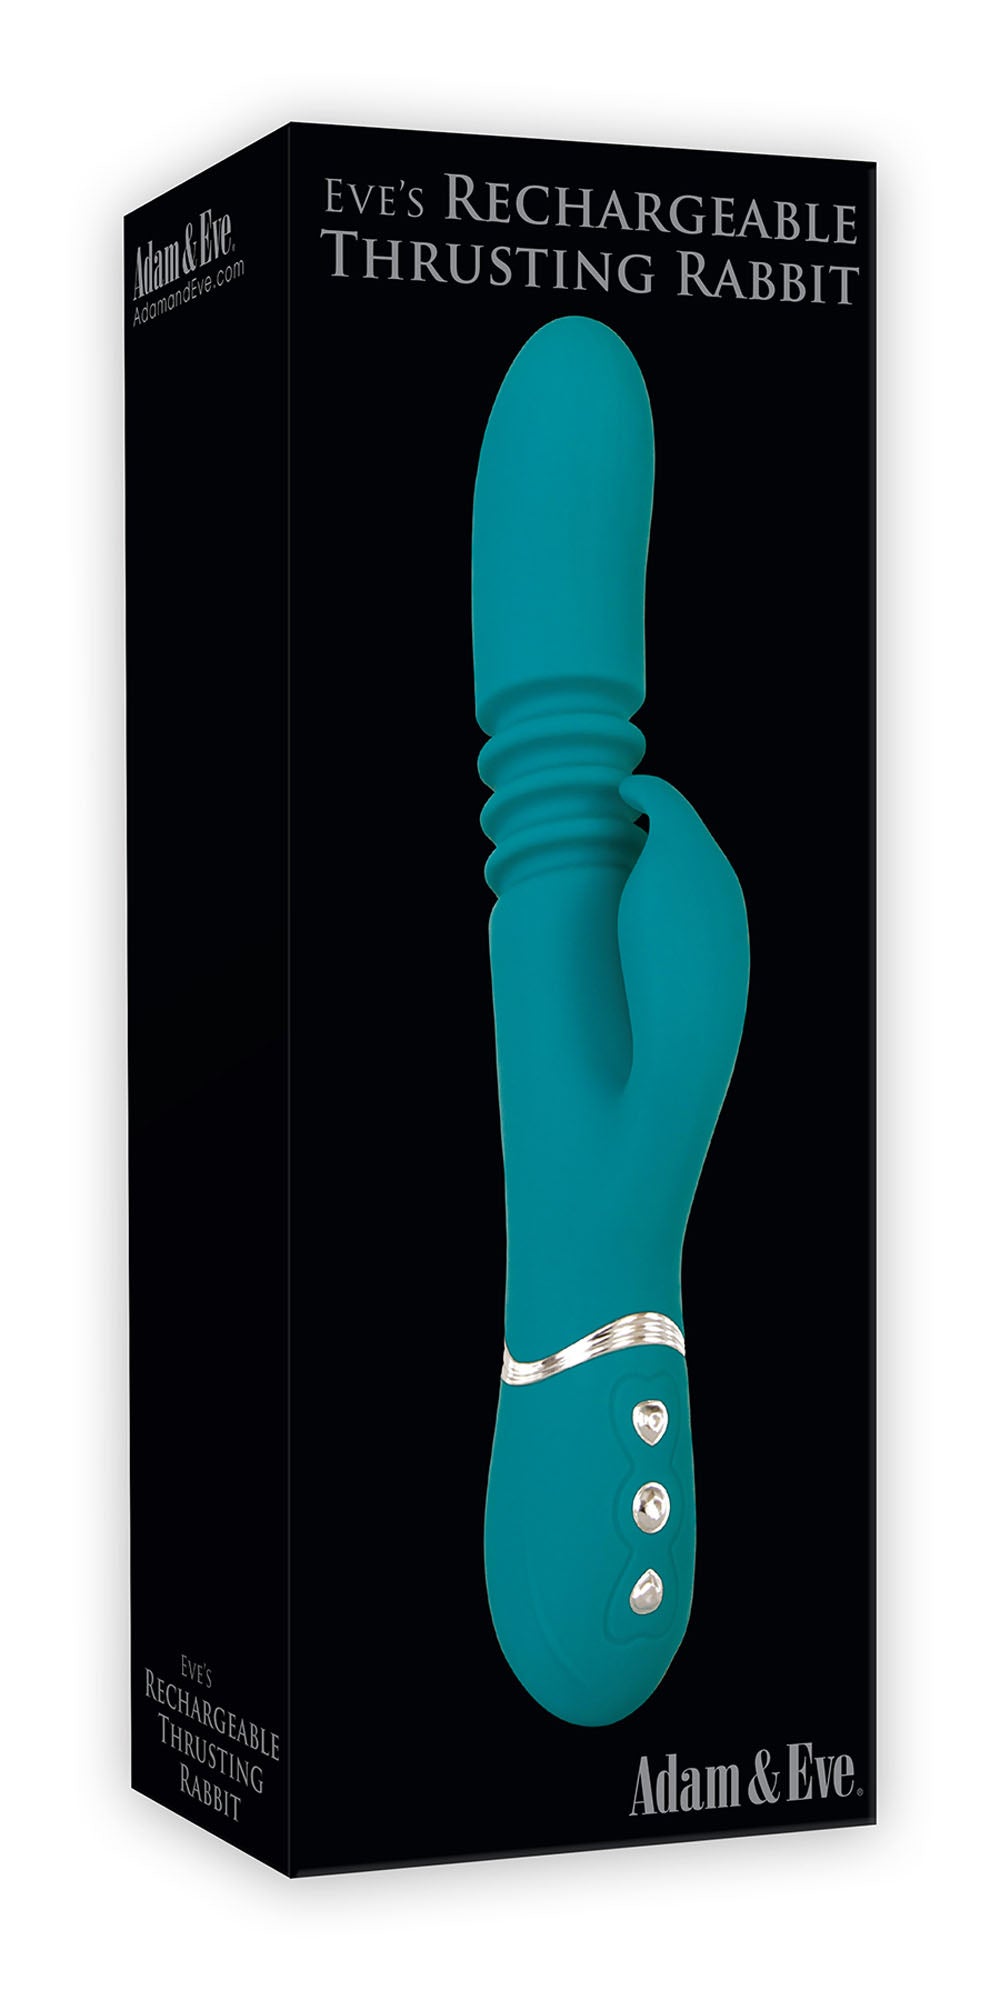 Eve's Rechargeable Thrusting Rabbit Vibrator